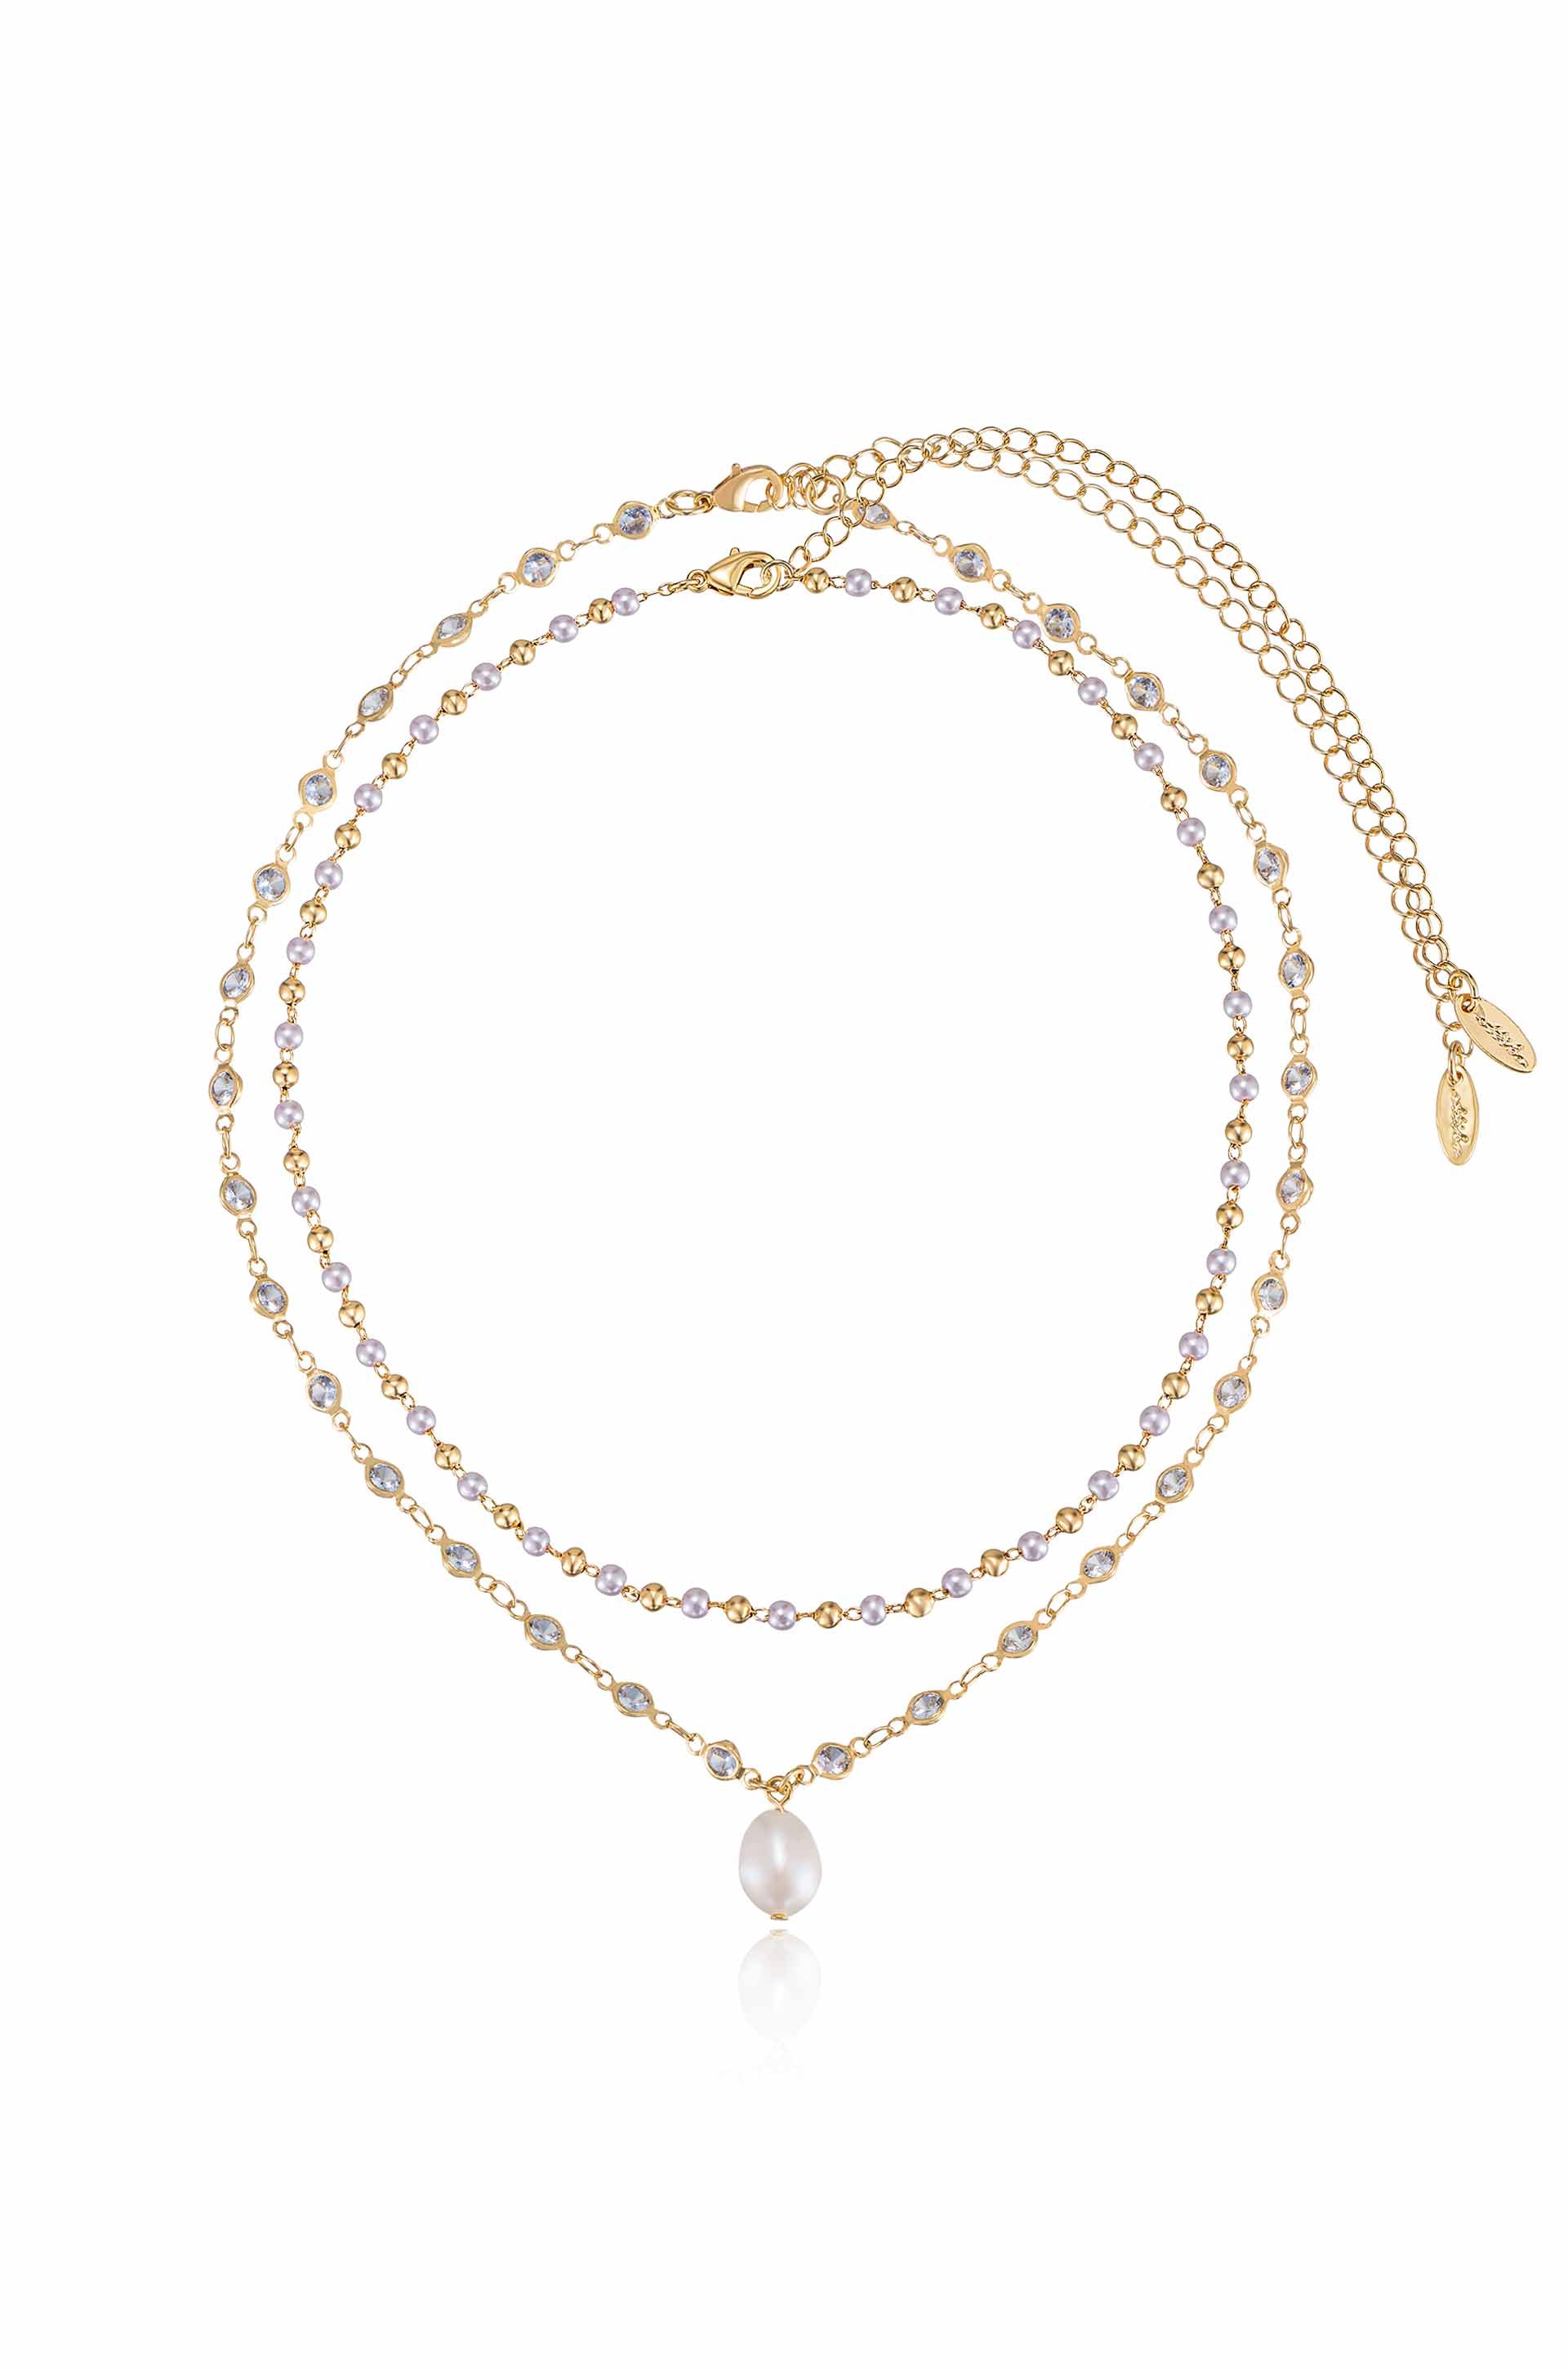 Crystal Spark and 18k Gold Plated Ball Chain Necklace Set on white